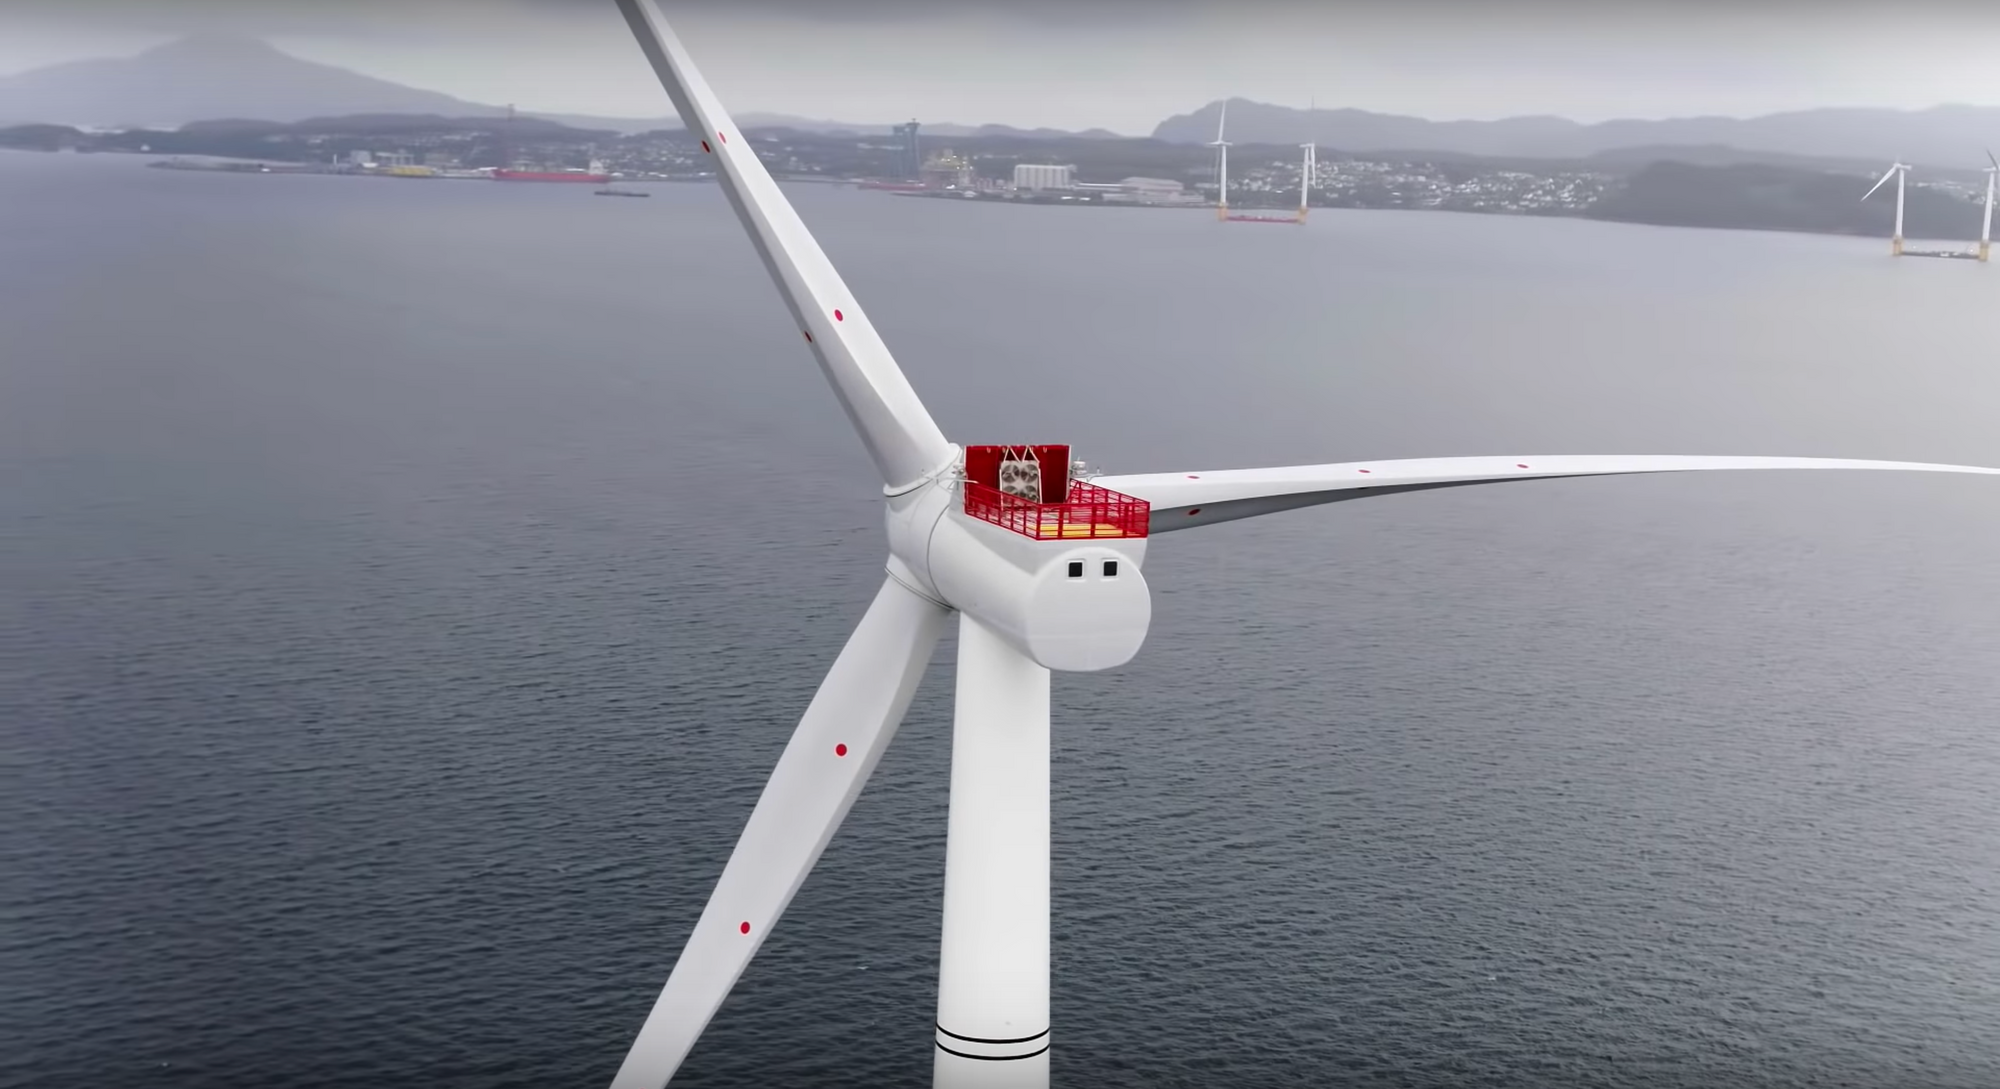 Spectacular images, video tell the story of the world's first offshore wind farm